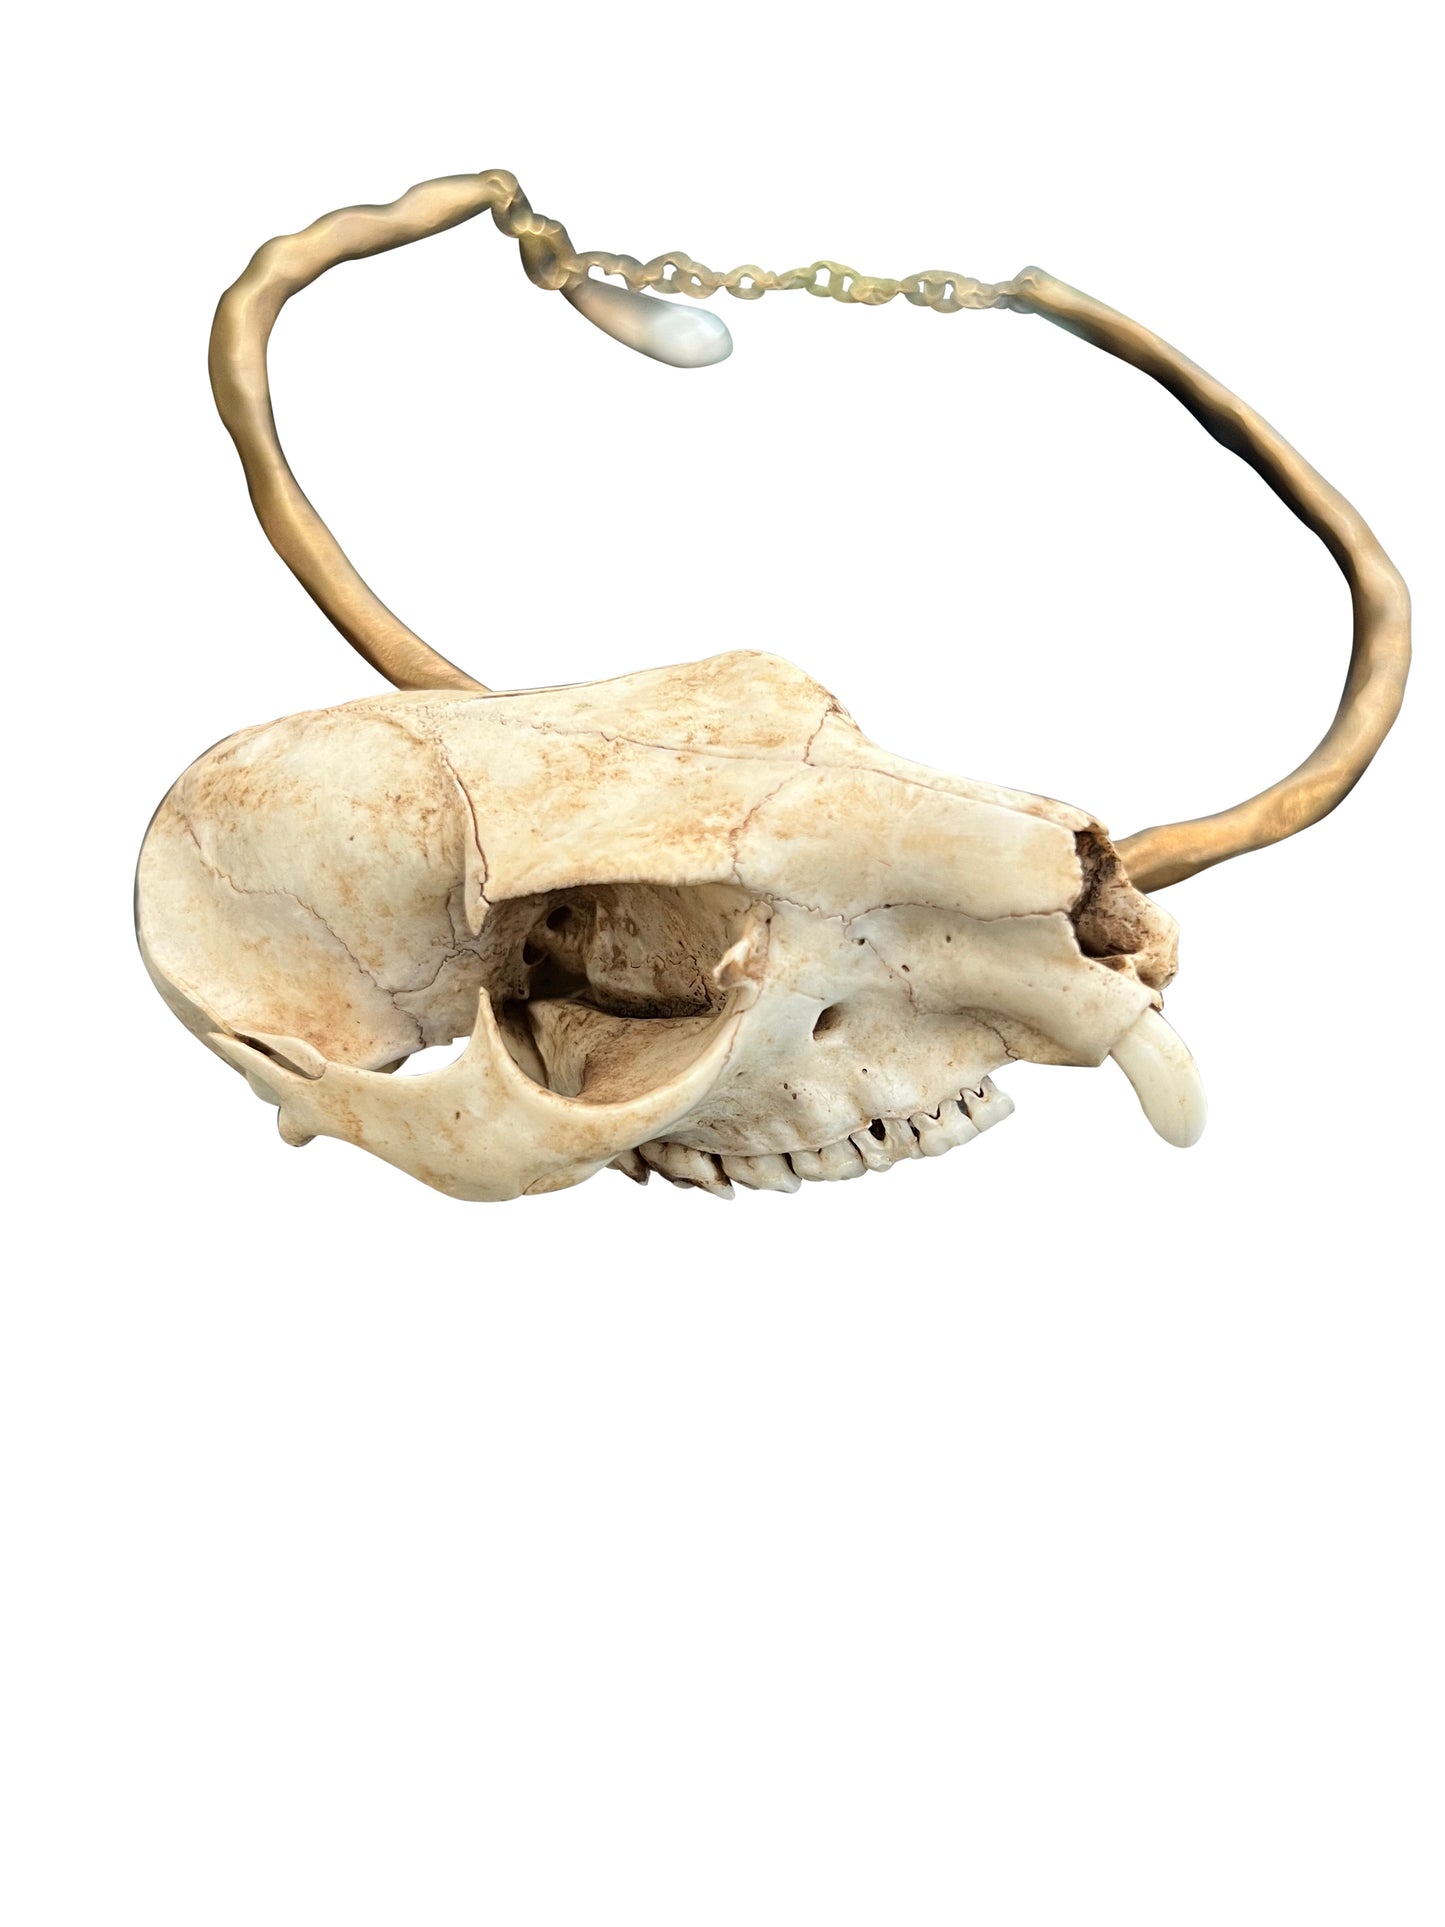 Brass Hoop Necklace with Bone